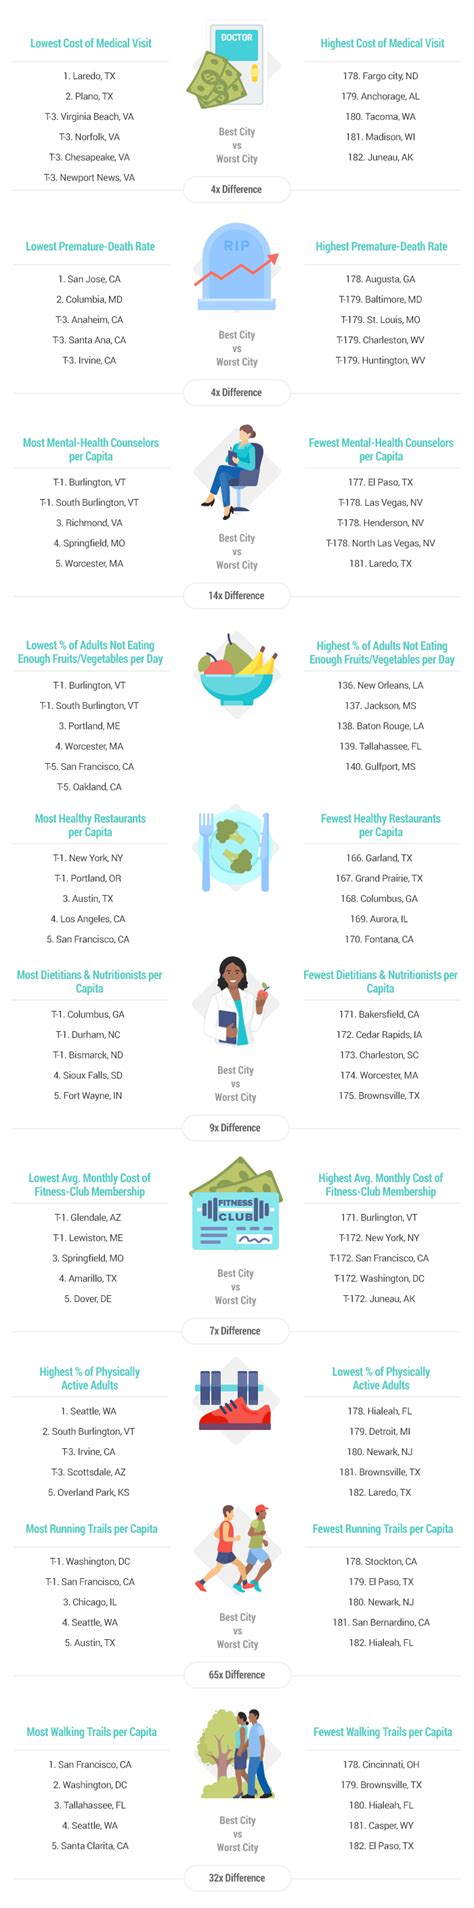 Healthiest And Unhealthiest Cities In America